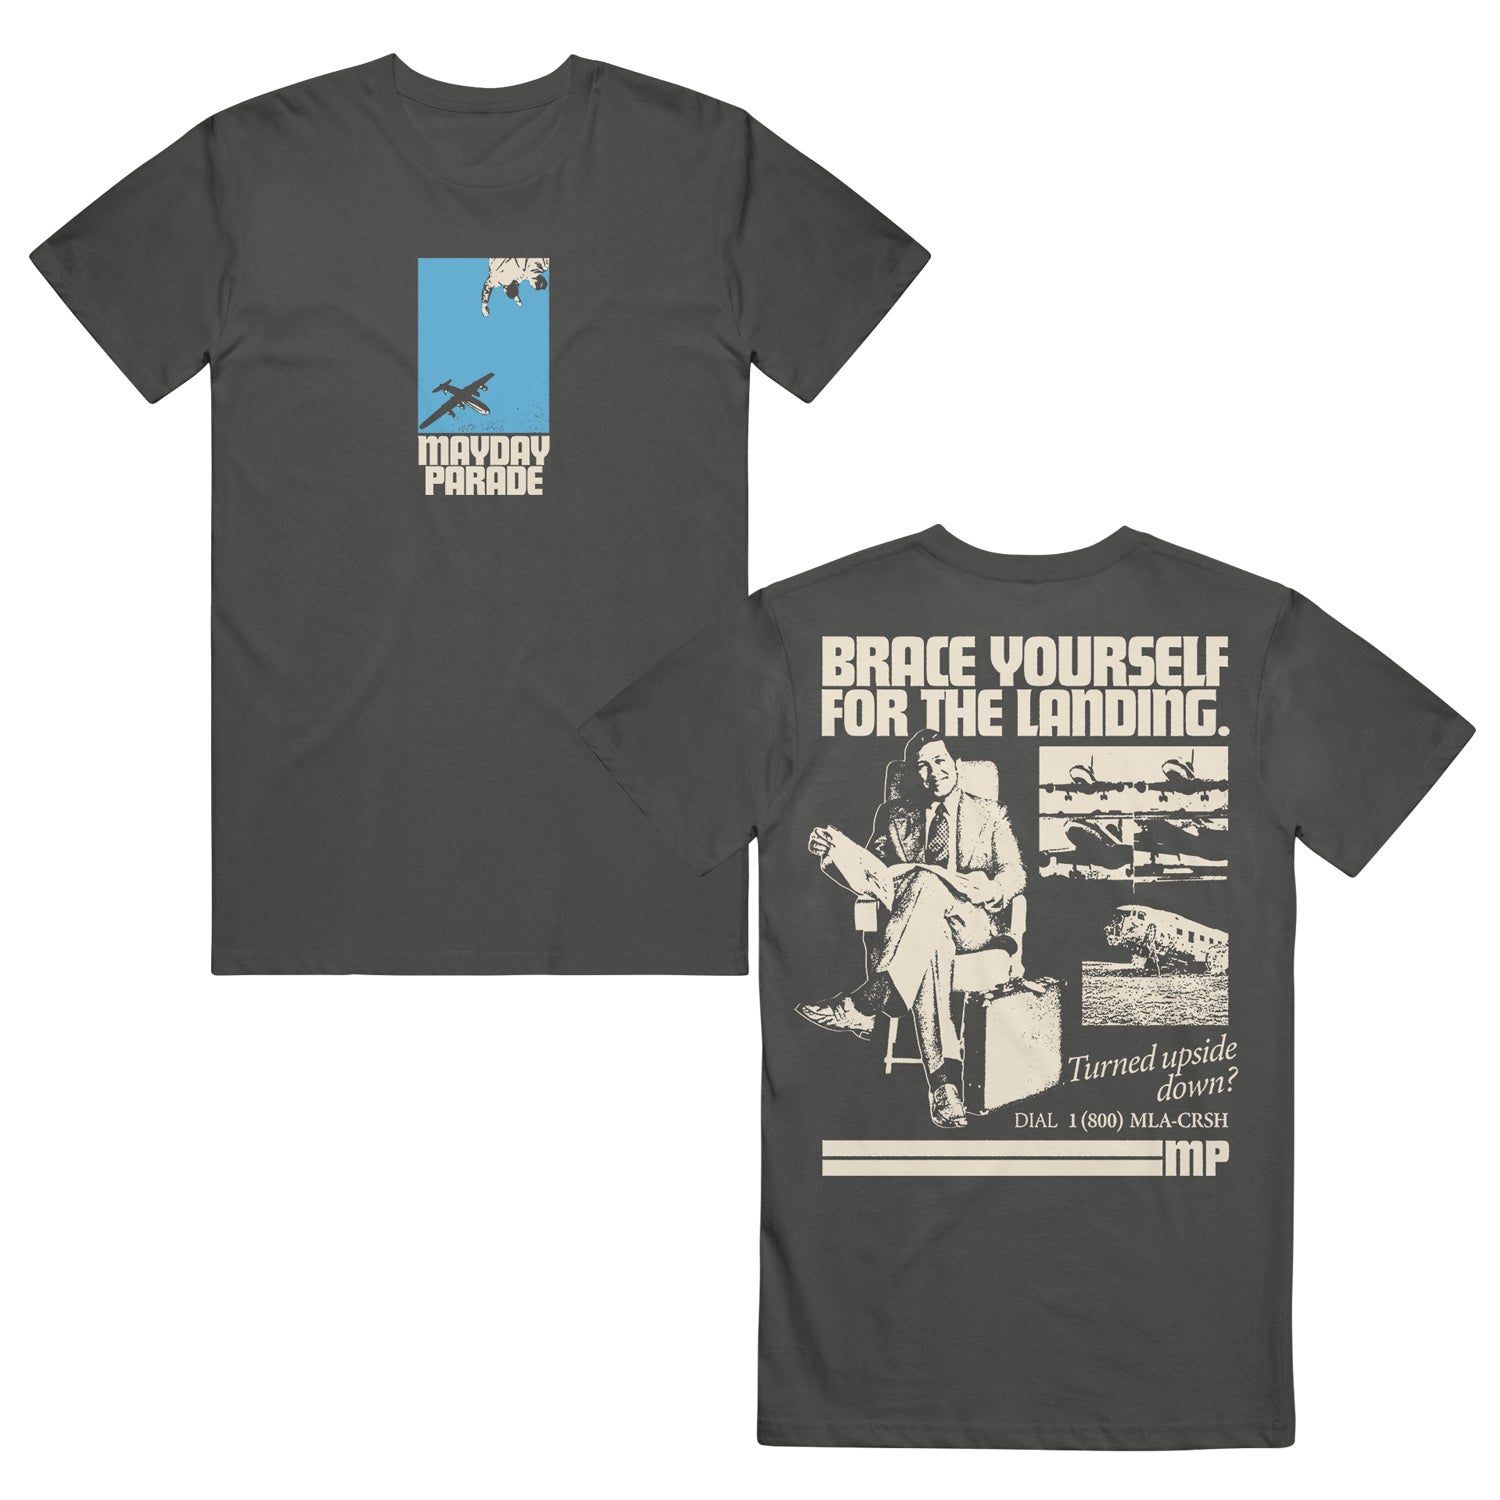 image of the front and back of a pepper colored tee shirt on a white background. front is on the left and has a center chest print of a blue rectangle with an airplane. below says mayday parade. the back is on the right and has an image of a man sitting with a suitcase and a collage of airplanes. across the shoulders says brace yourself for the landing. on the bottom right says Turned upside down? dial 1 800 m l s c r s h